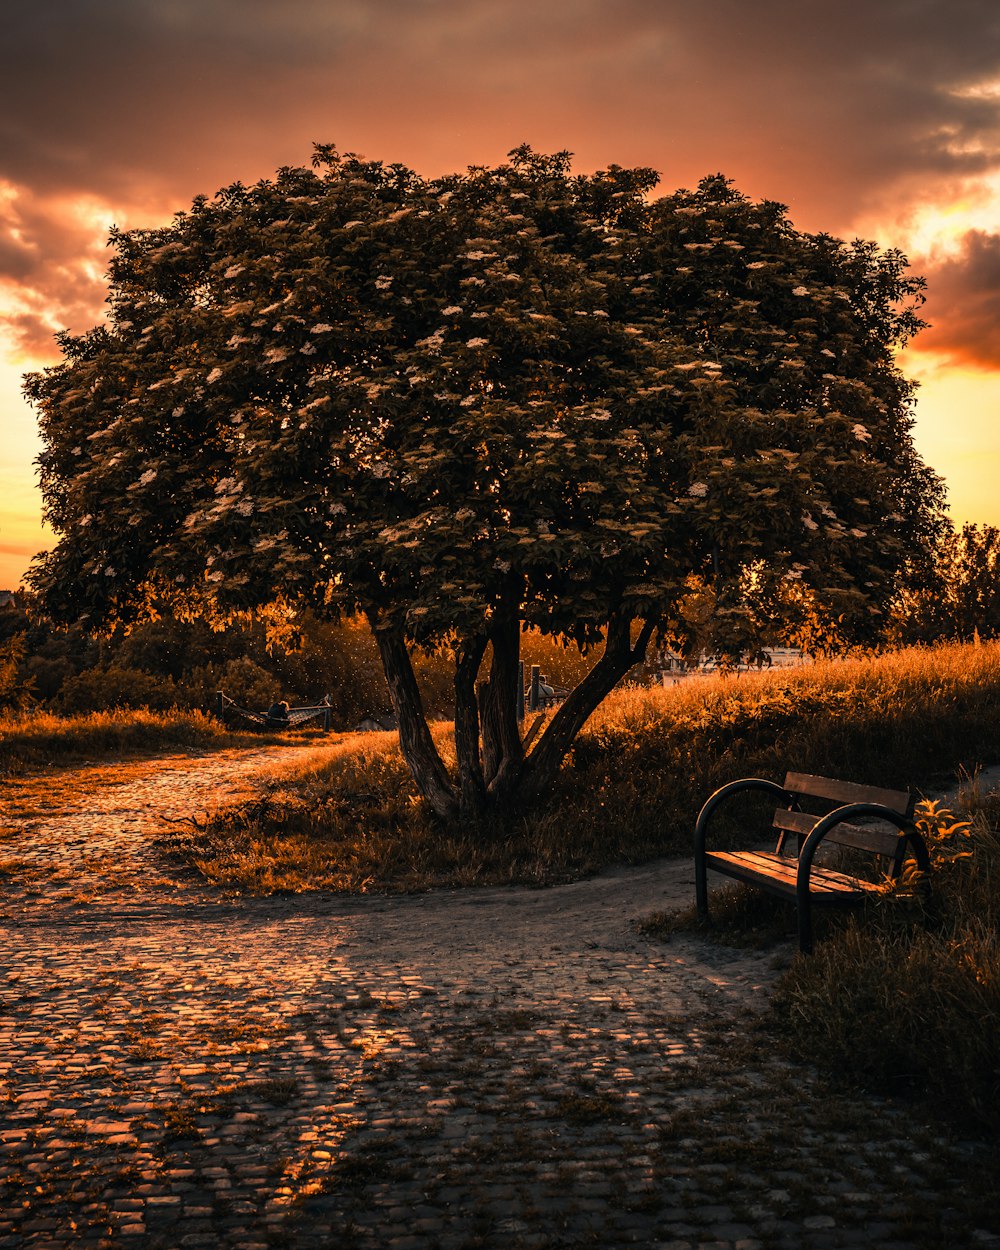 a bench under a tree on a dirt path